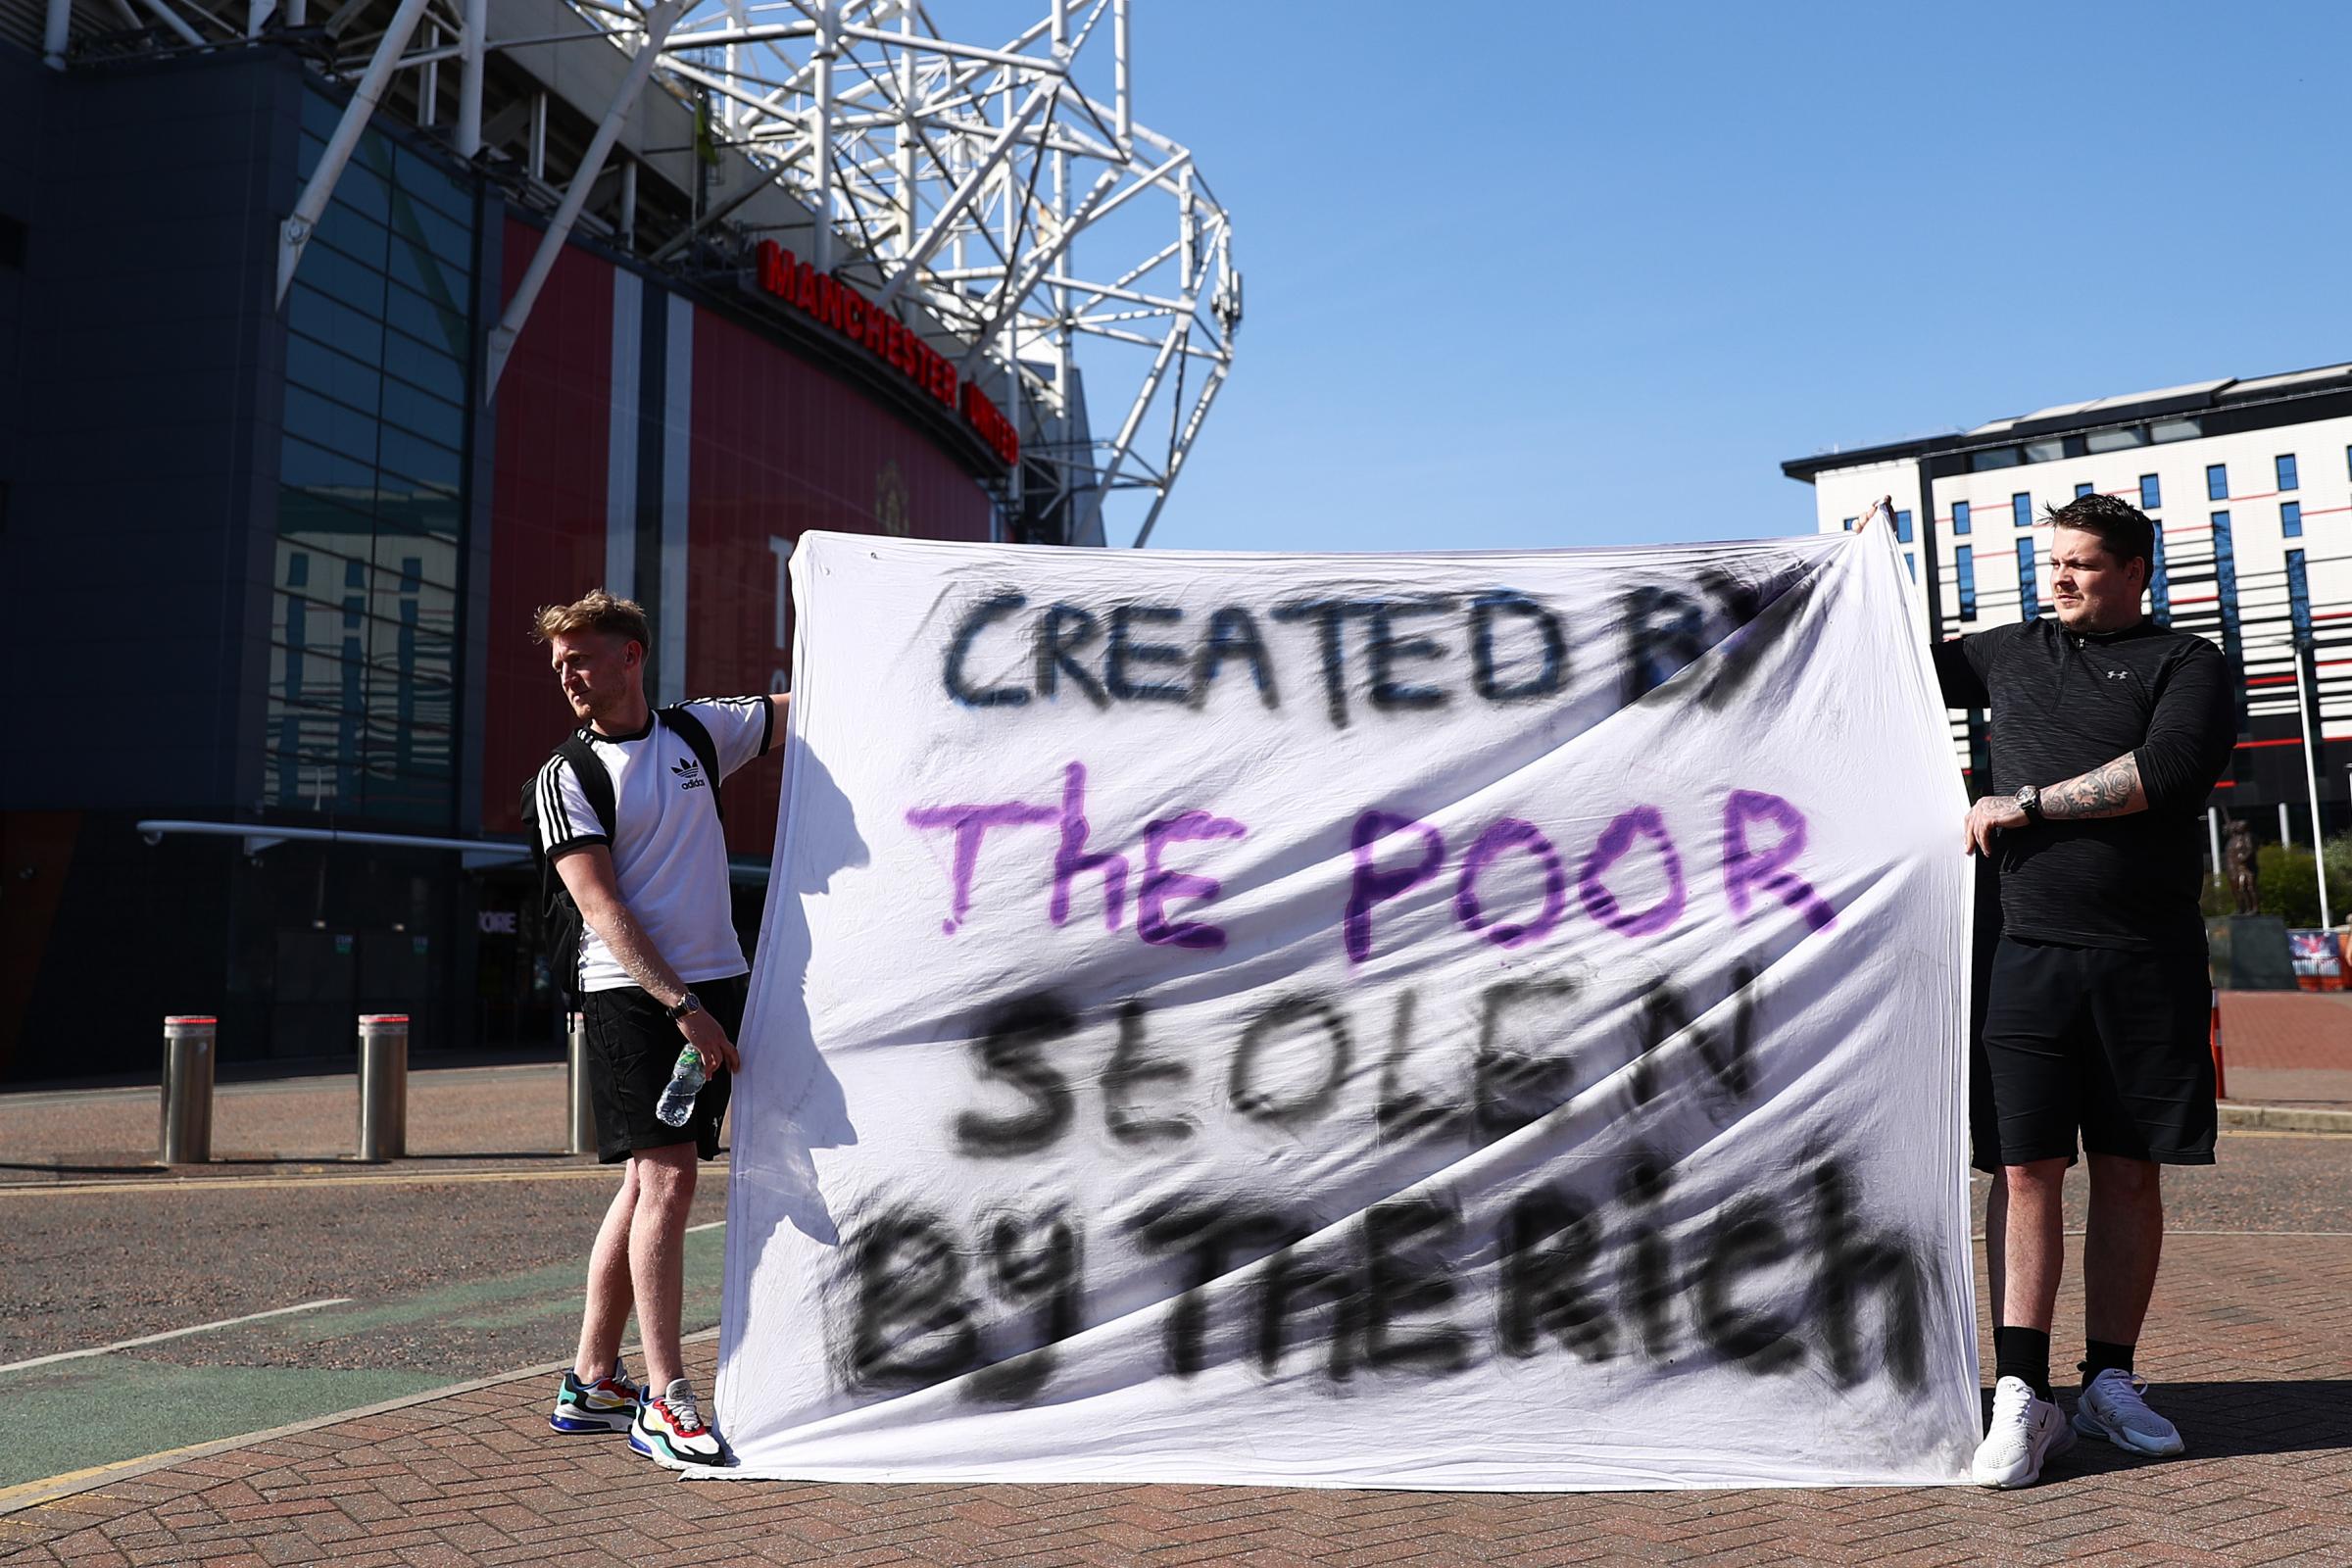 Football fans opposing the European Super League outside Old Trafford in Manchester. Credit: PA